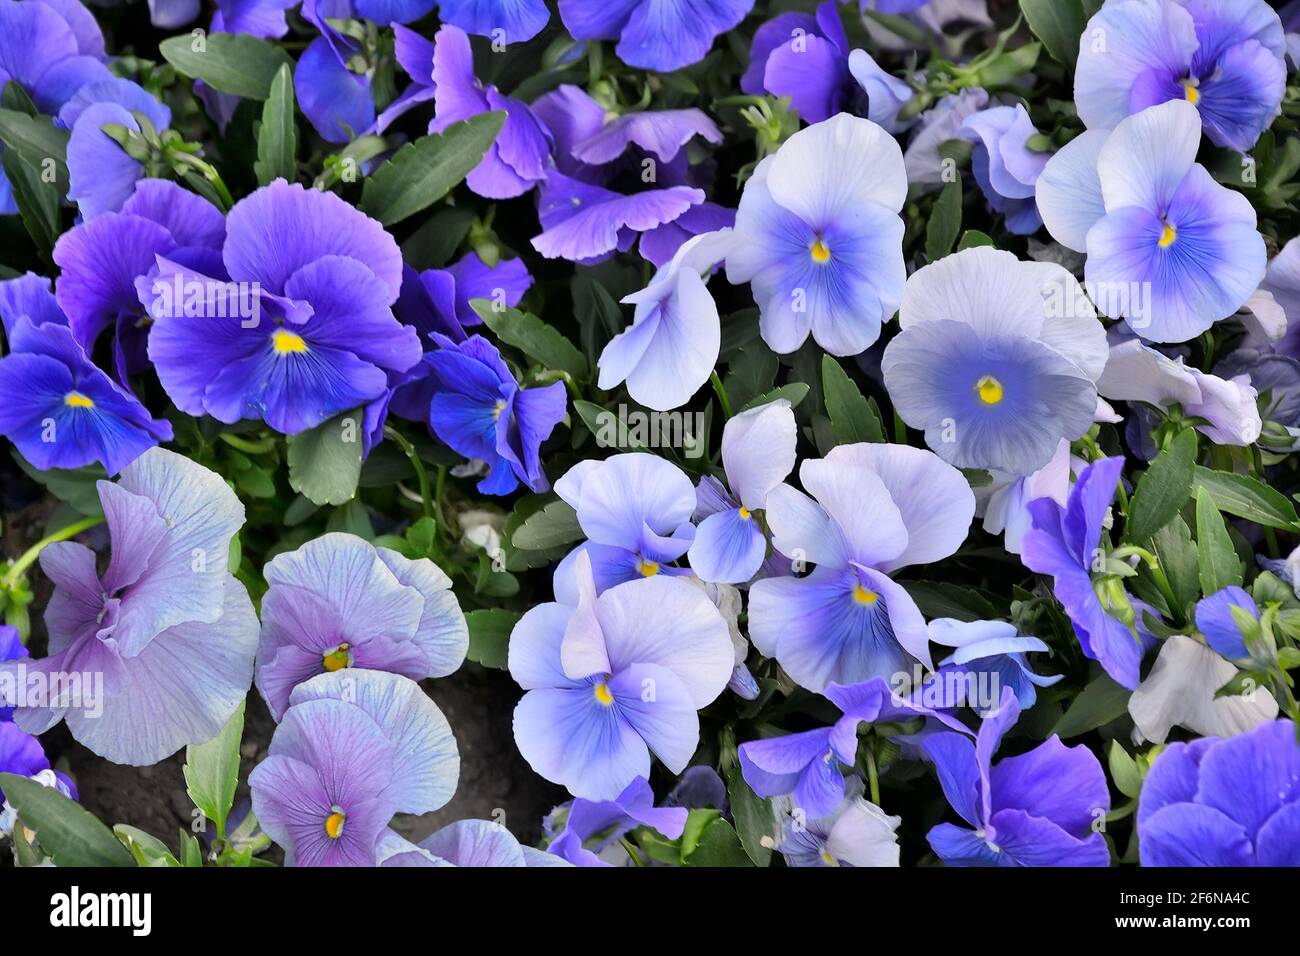 Heartsease or pansy flowers in blue-white colors - natural floral background. Blossoming violet flowers or pansies on flowerbed in garden close up. Ro Stock Photo